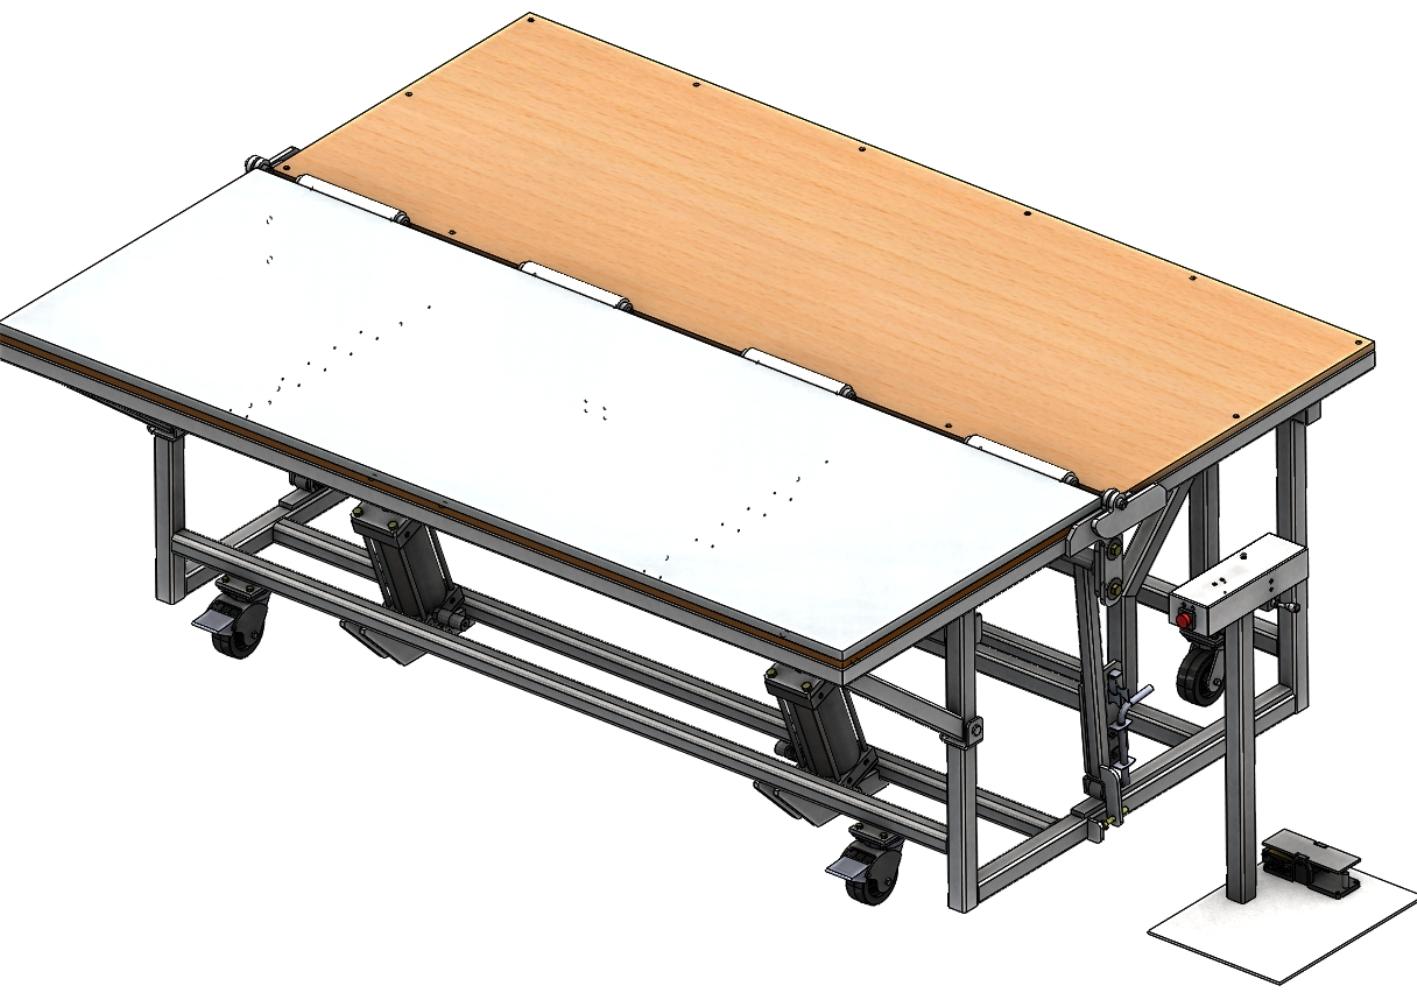 Manufacture of a pneumatic folding table